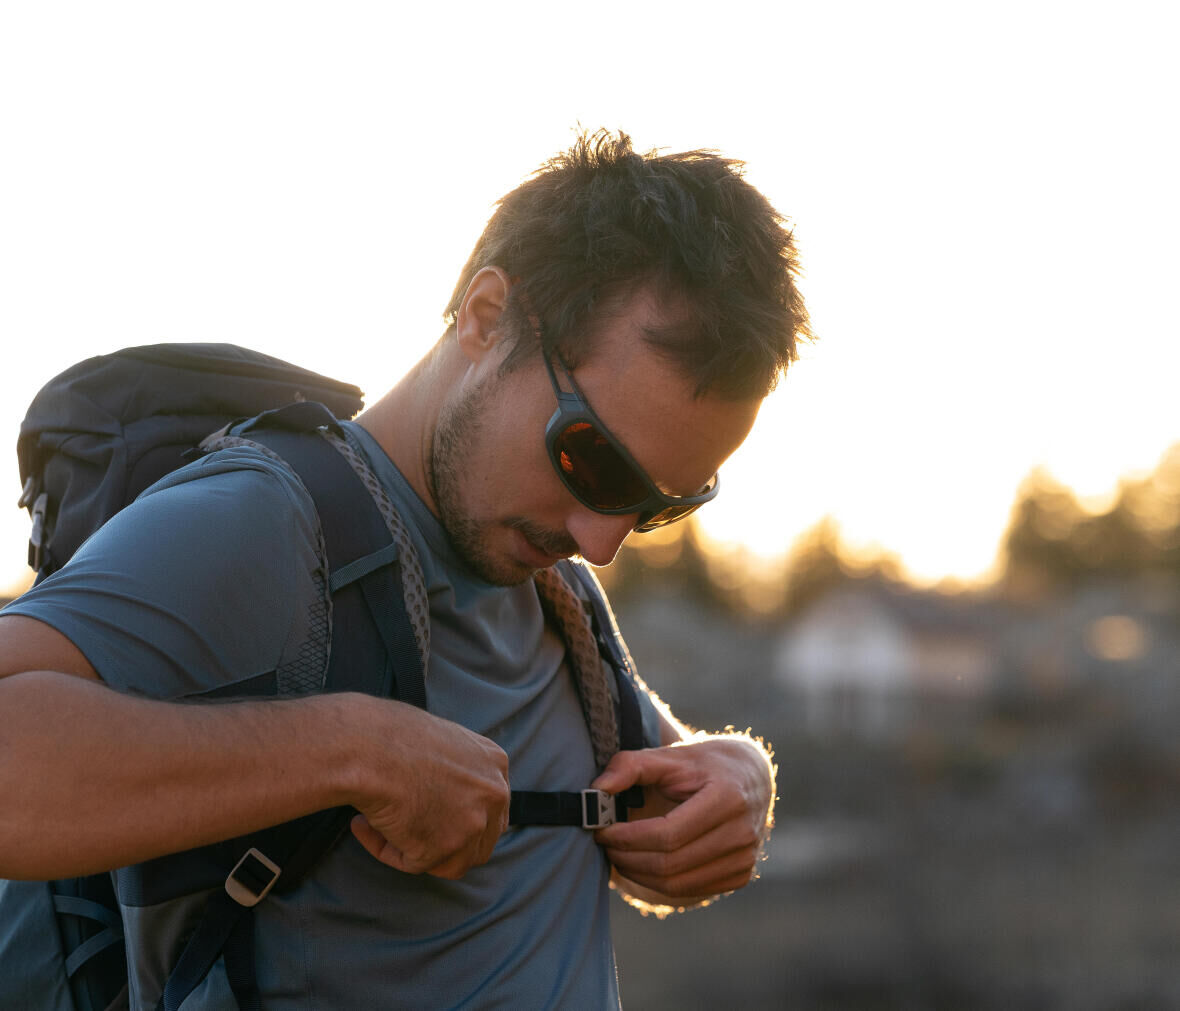 HOW TO CHOOSE YOUR HIKING SUNGLASSES?